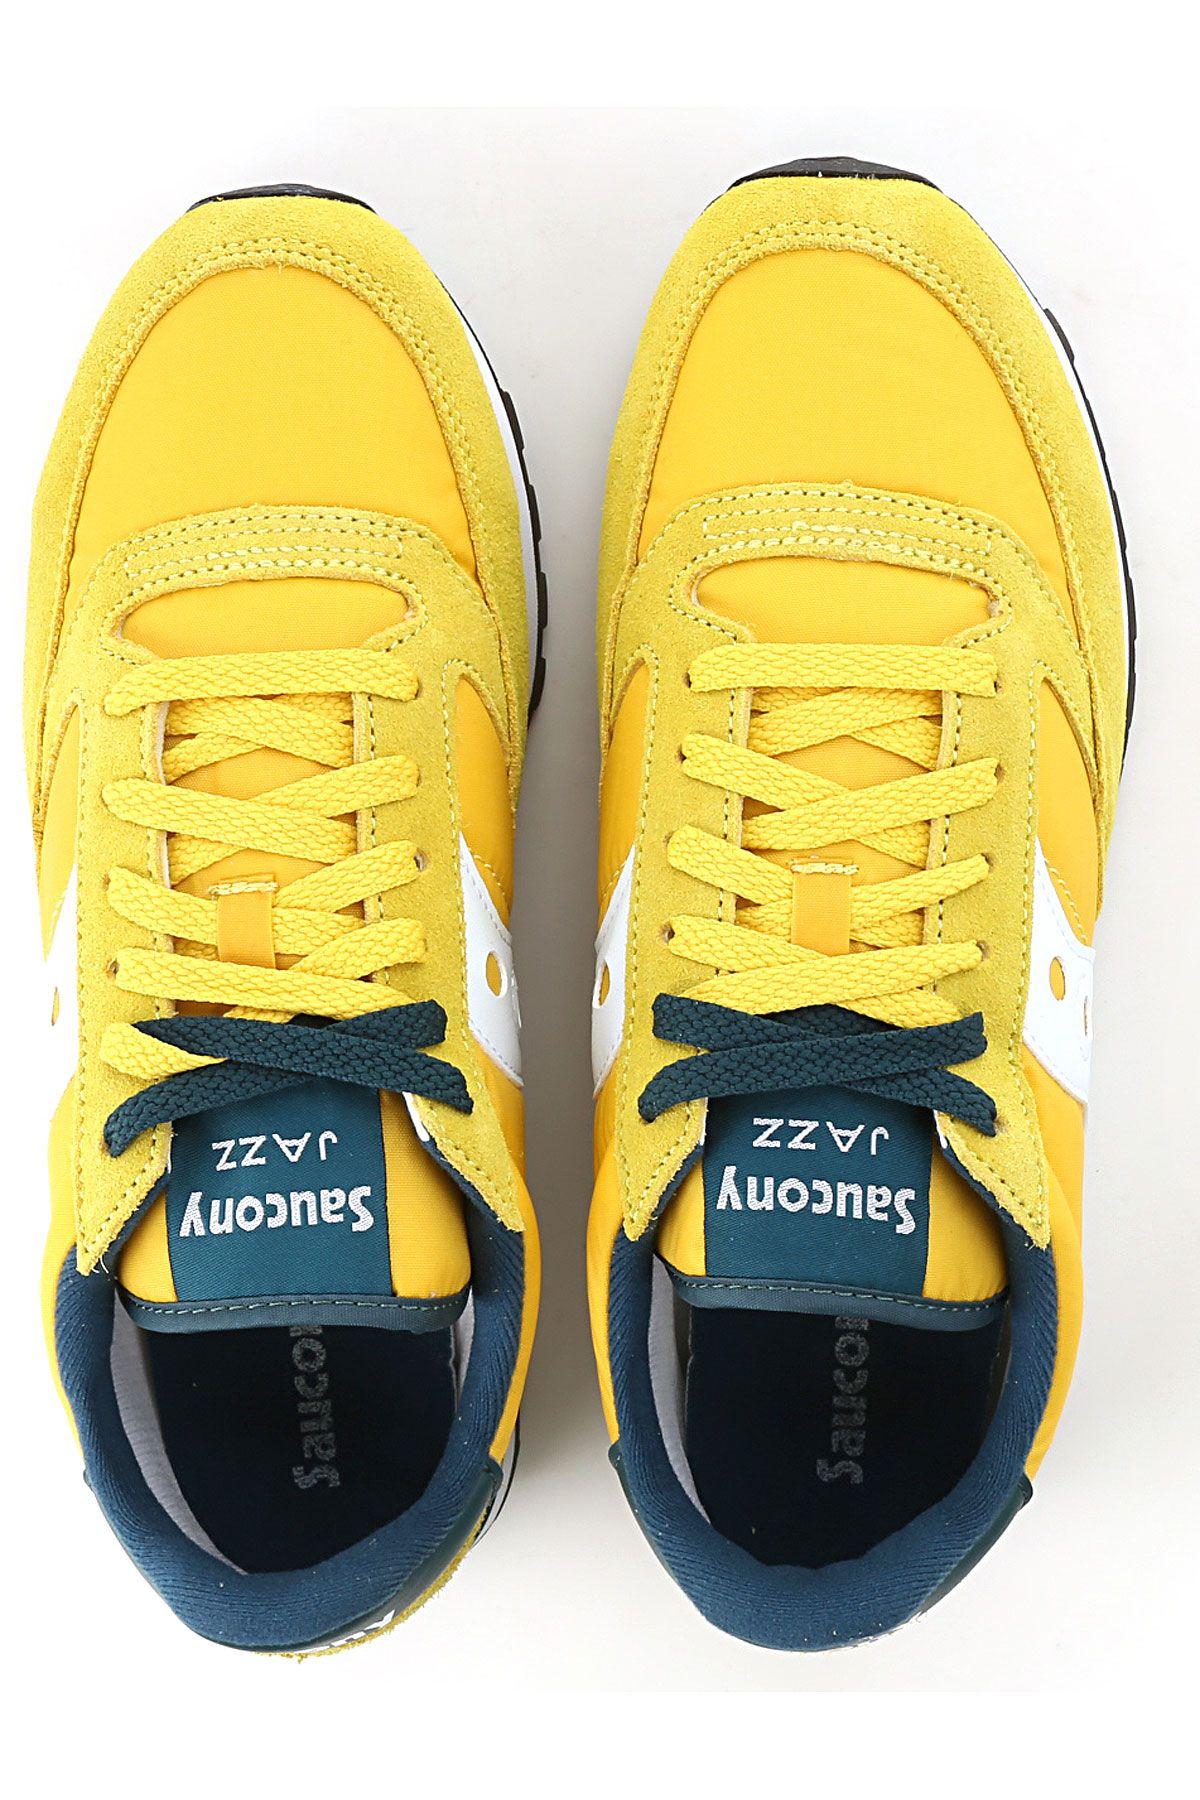 Petrol Green and Yellow Logo - Saucony Shoes for Men Fall - Winter 2018/19 Yellow•Other colors ...